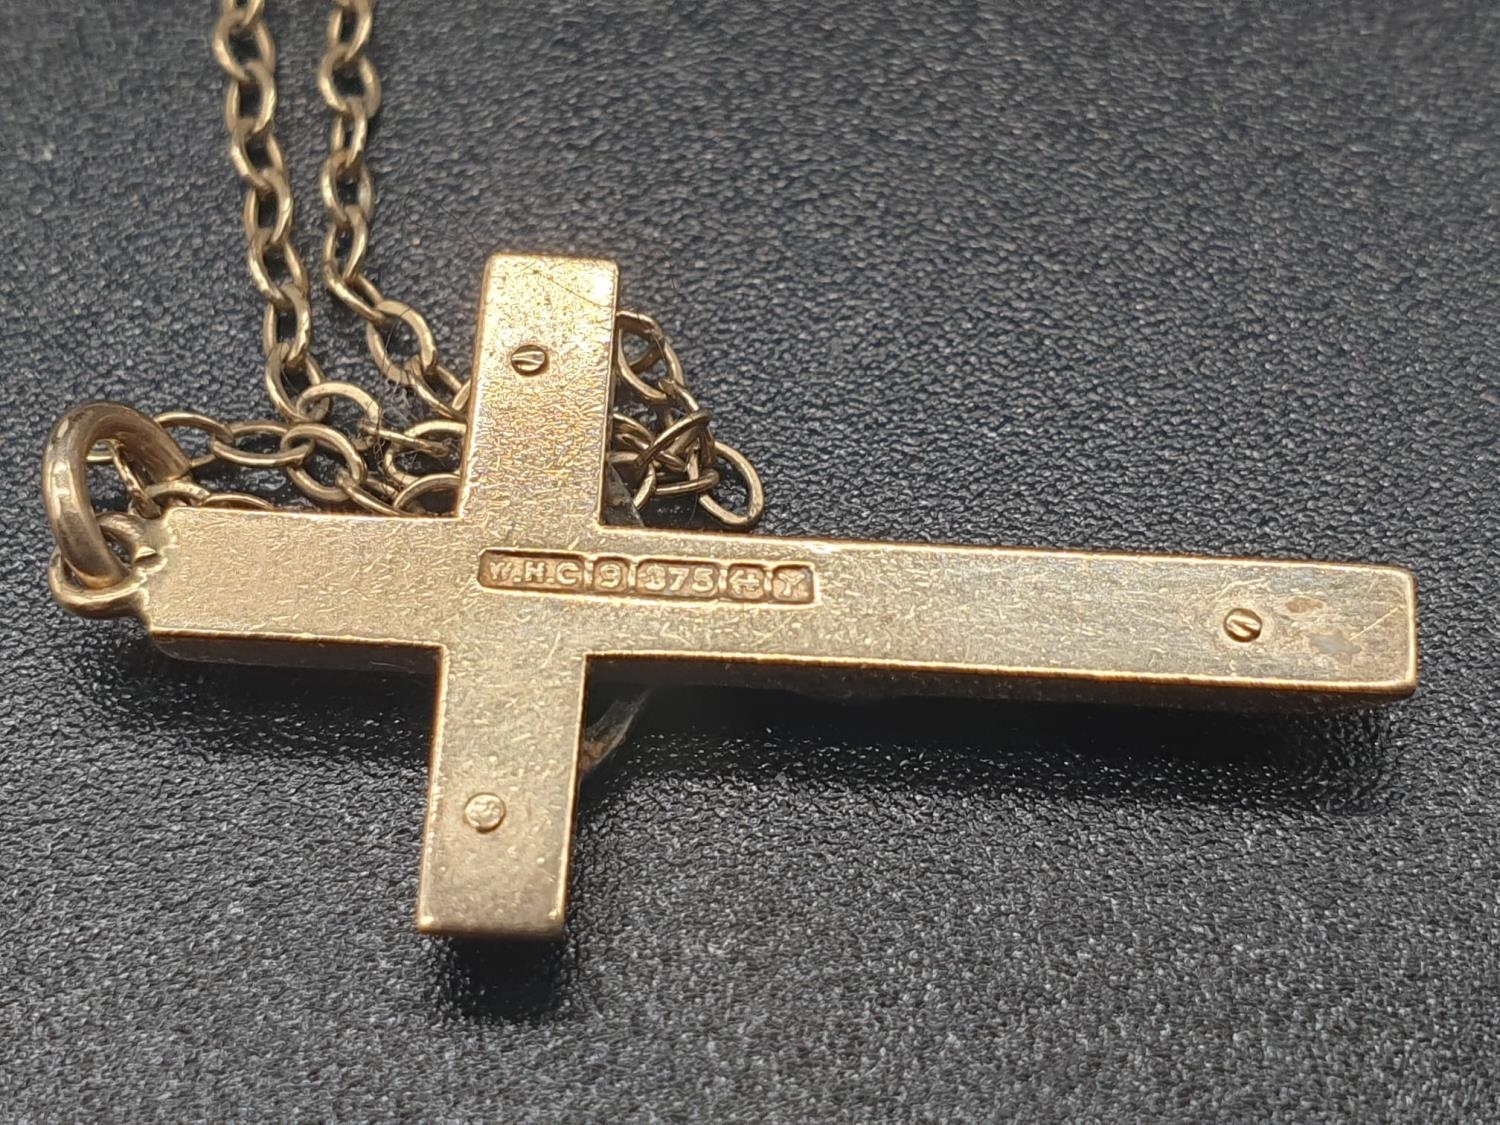 9K Yellow Gold Link Necklace with Crucifix Pendant. 46cm. 3.08g - Image 4 of 7